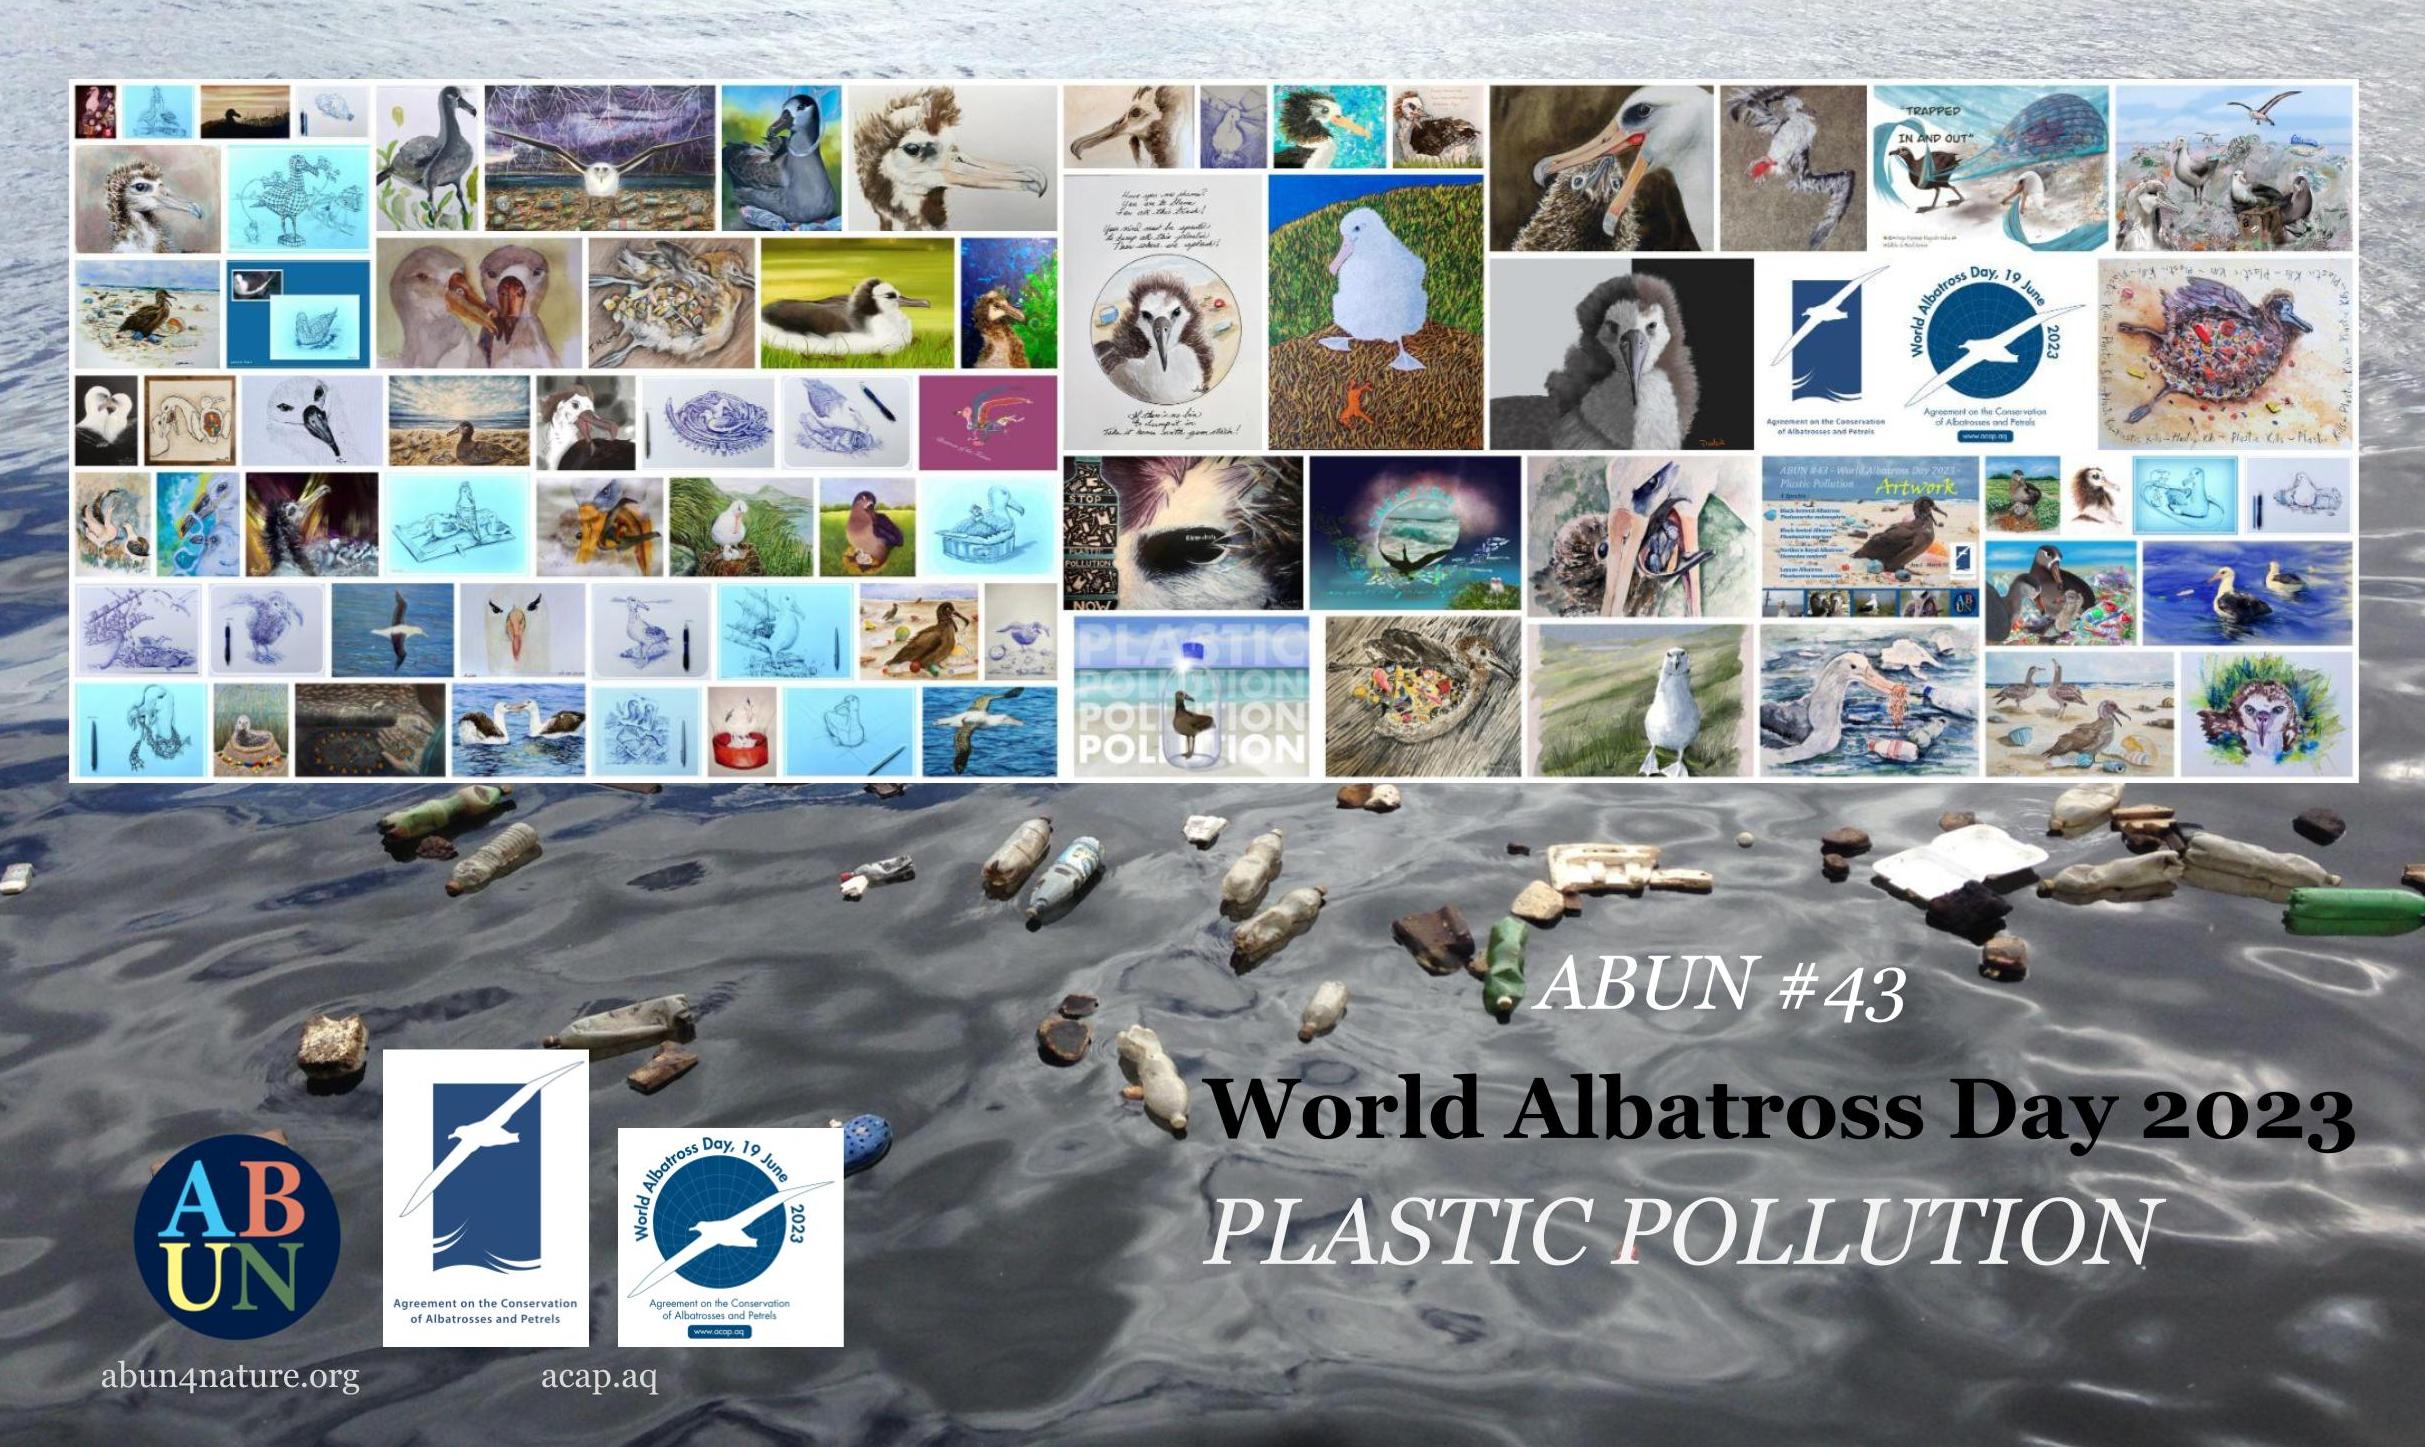 AA Plastic Pollution collage poster